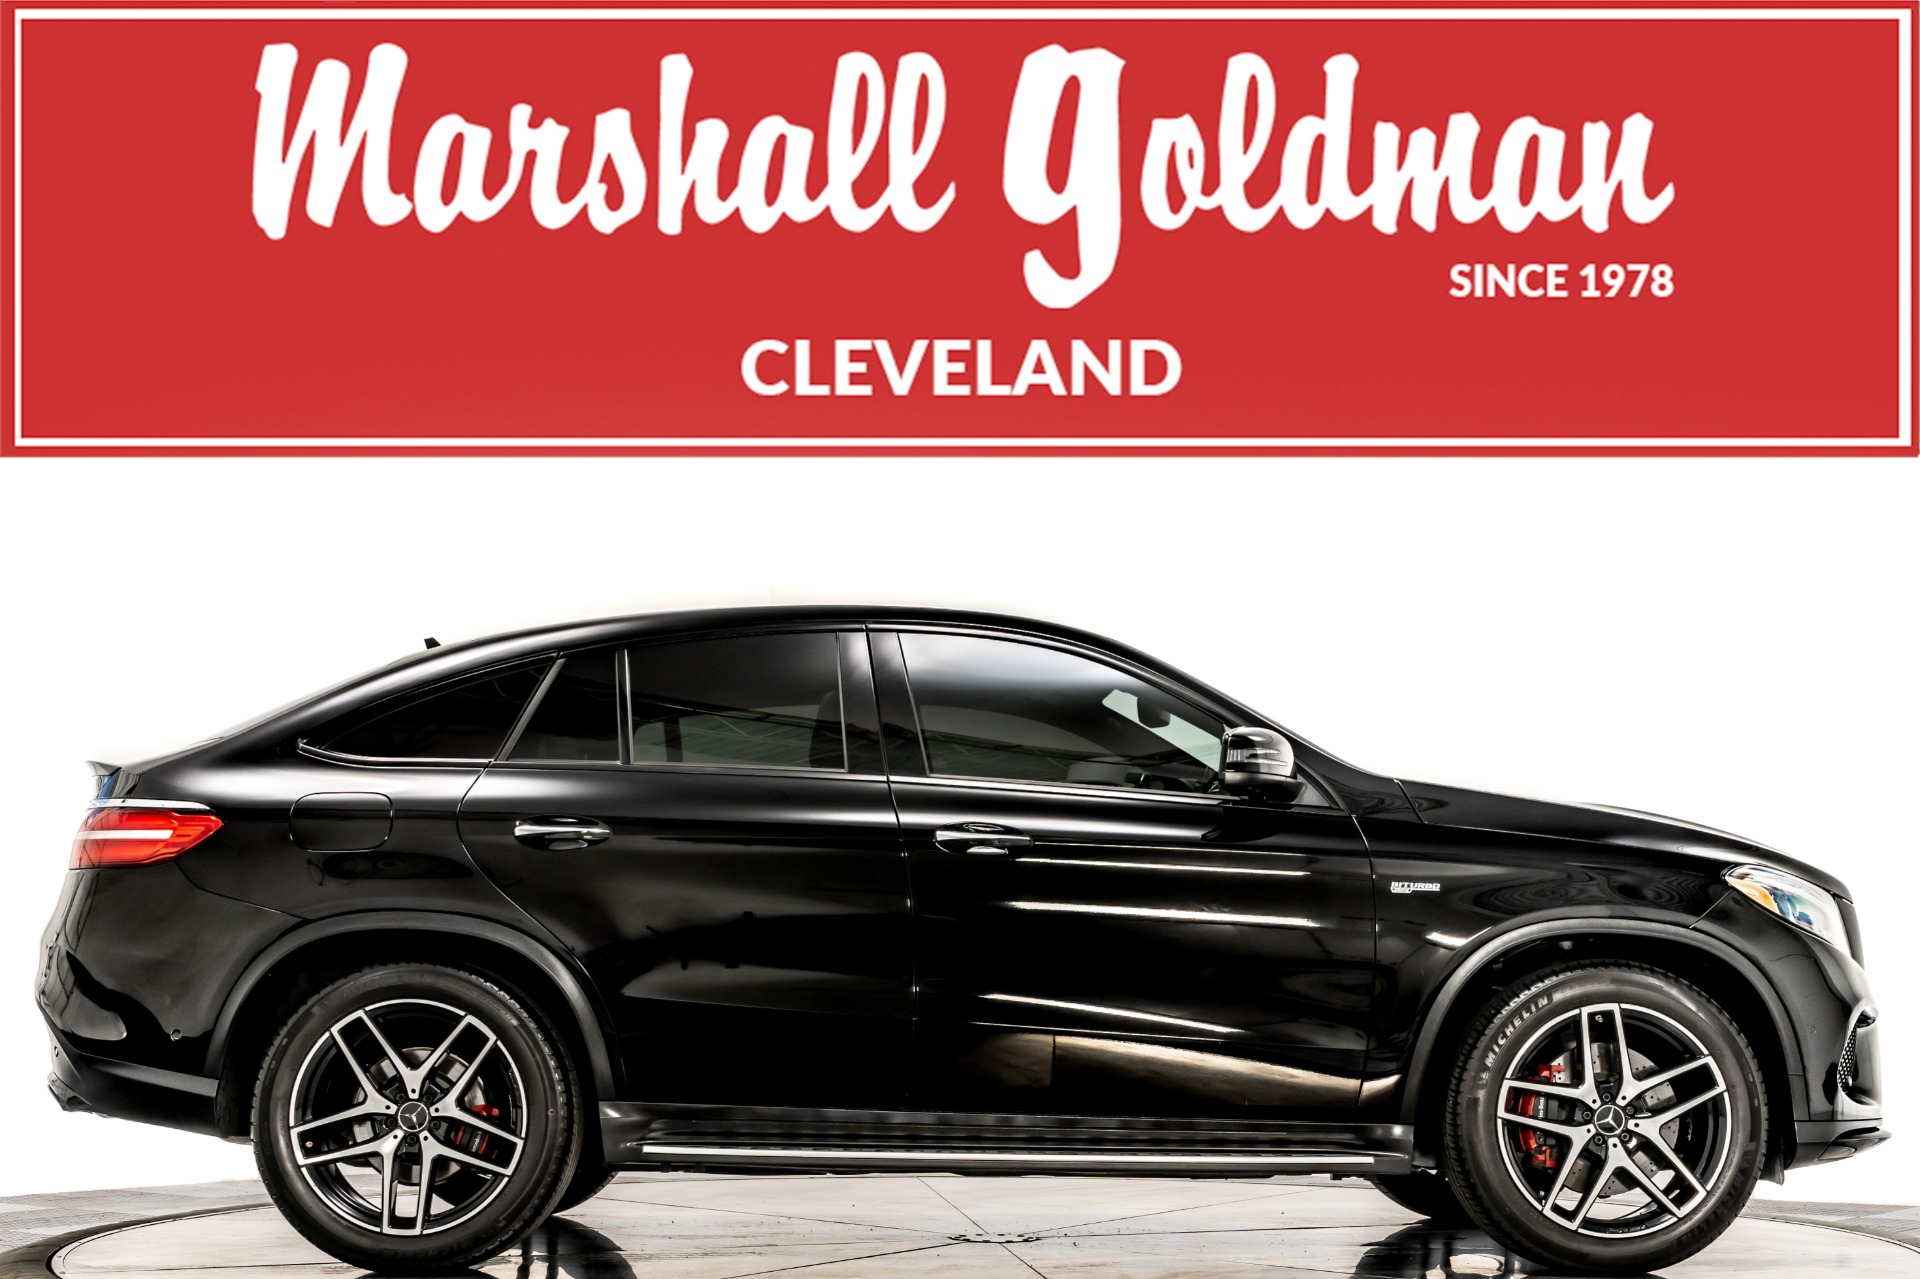 og:title":"Used 2019 Mercedes-Benz AMG GLE 43 Coupe For Sale (Sold) |  Marshall Goldman Motor Sales Stock #W23696","og:description":"Used 2019  Mercedes-Benz AMG GLE 43 Coupe Stock # W23696 in Warrensville Heights, OH  at Marshall